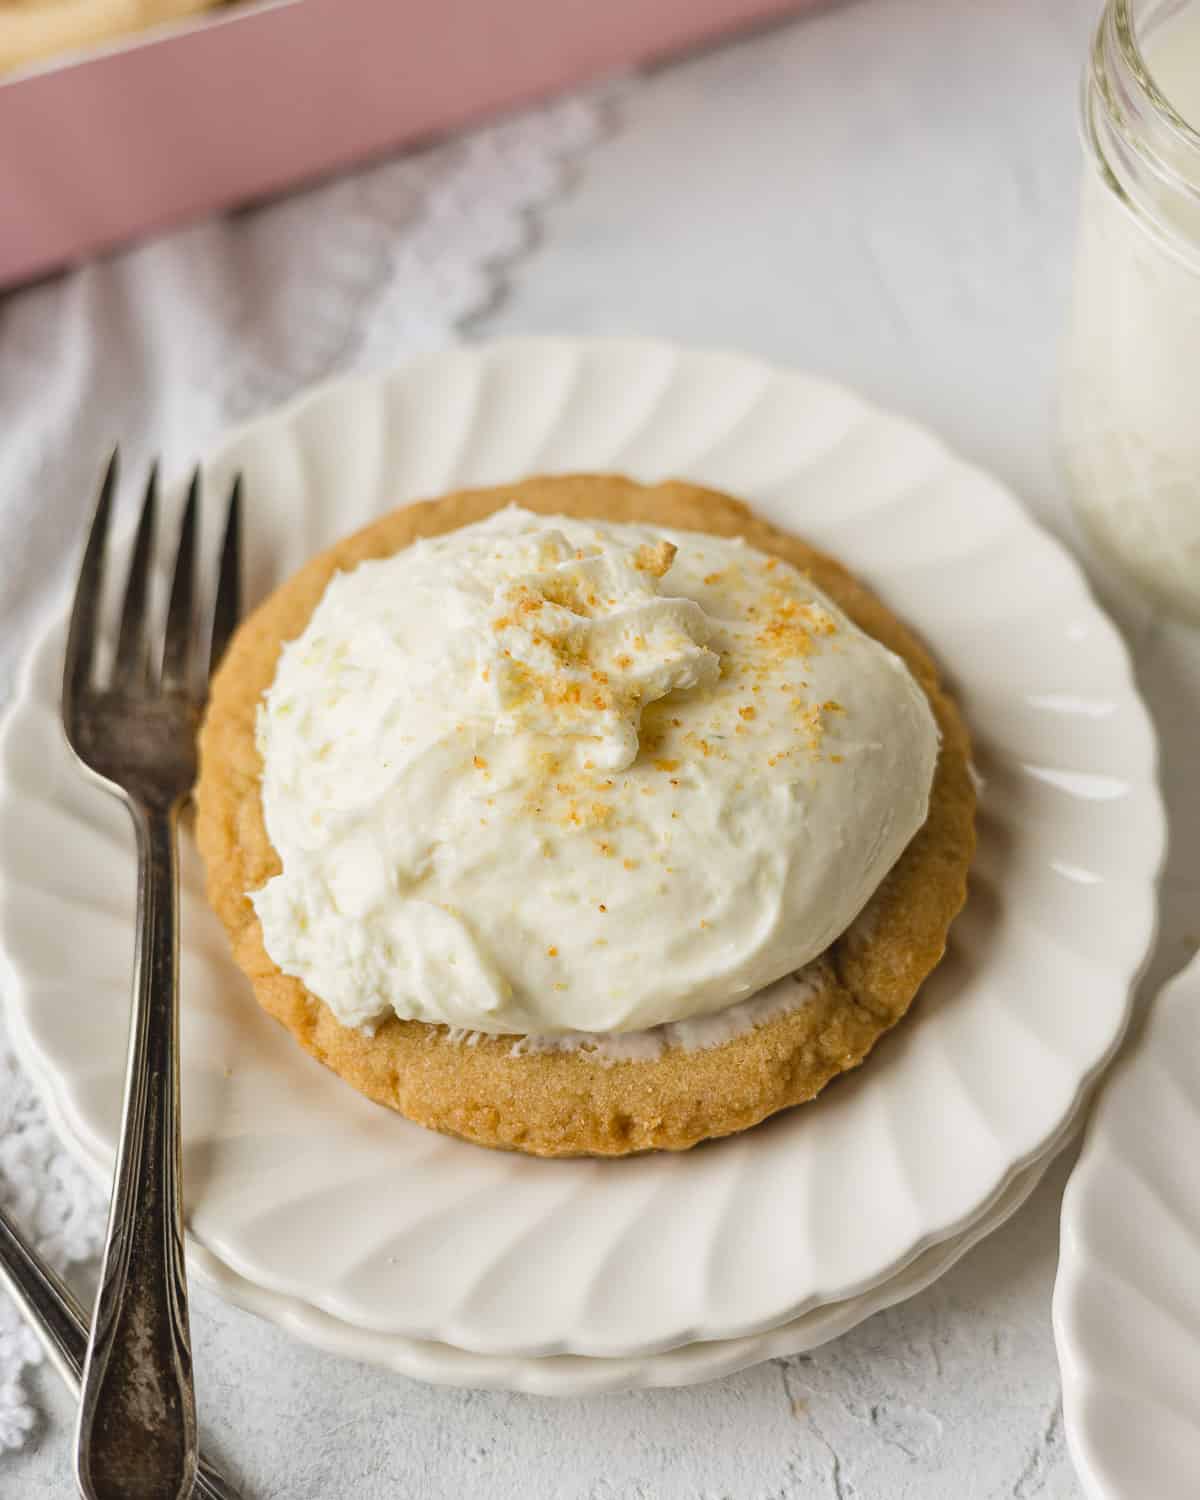 Crumbl Key Lime Pie cookie with scoop of key lime pie filling and whipped cream on a plate with a small fork.